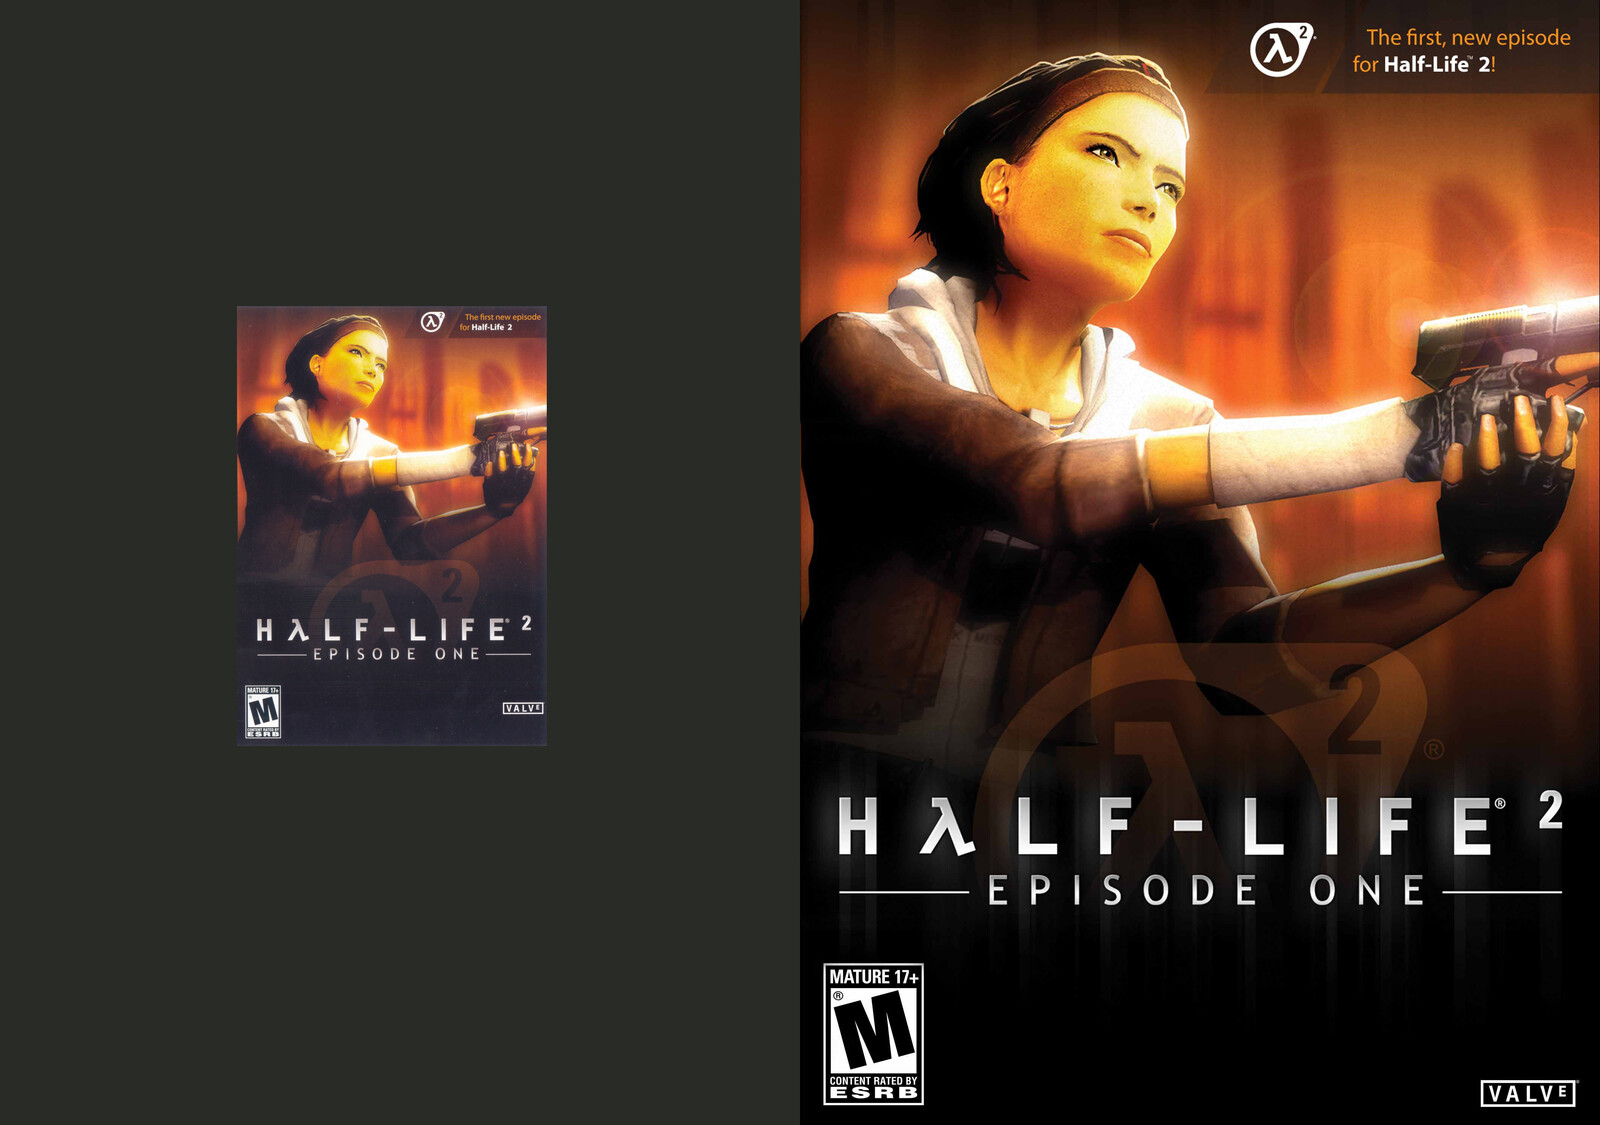 Half-Life 2: Episode One (original scan cover vs. retouched)